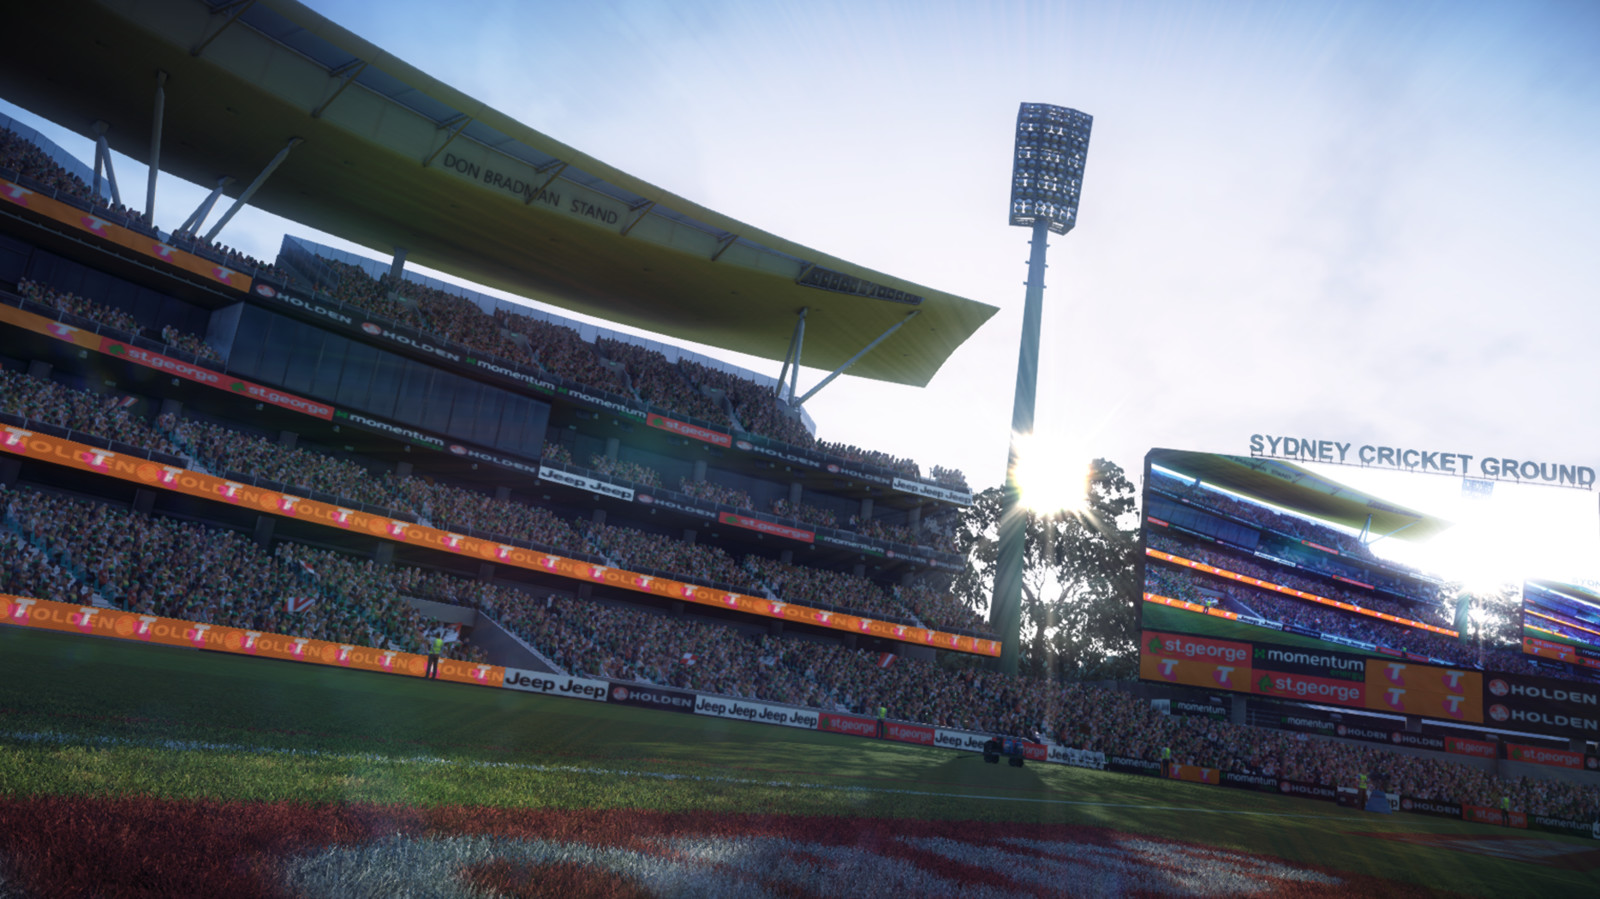 New Sydney cricket ground stand, field grass for all stadiums, trees and sun sprite.